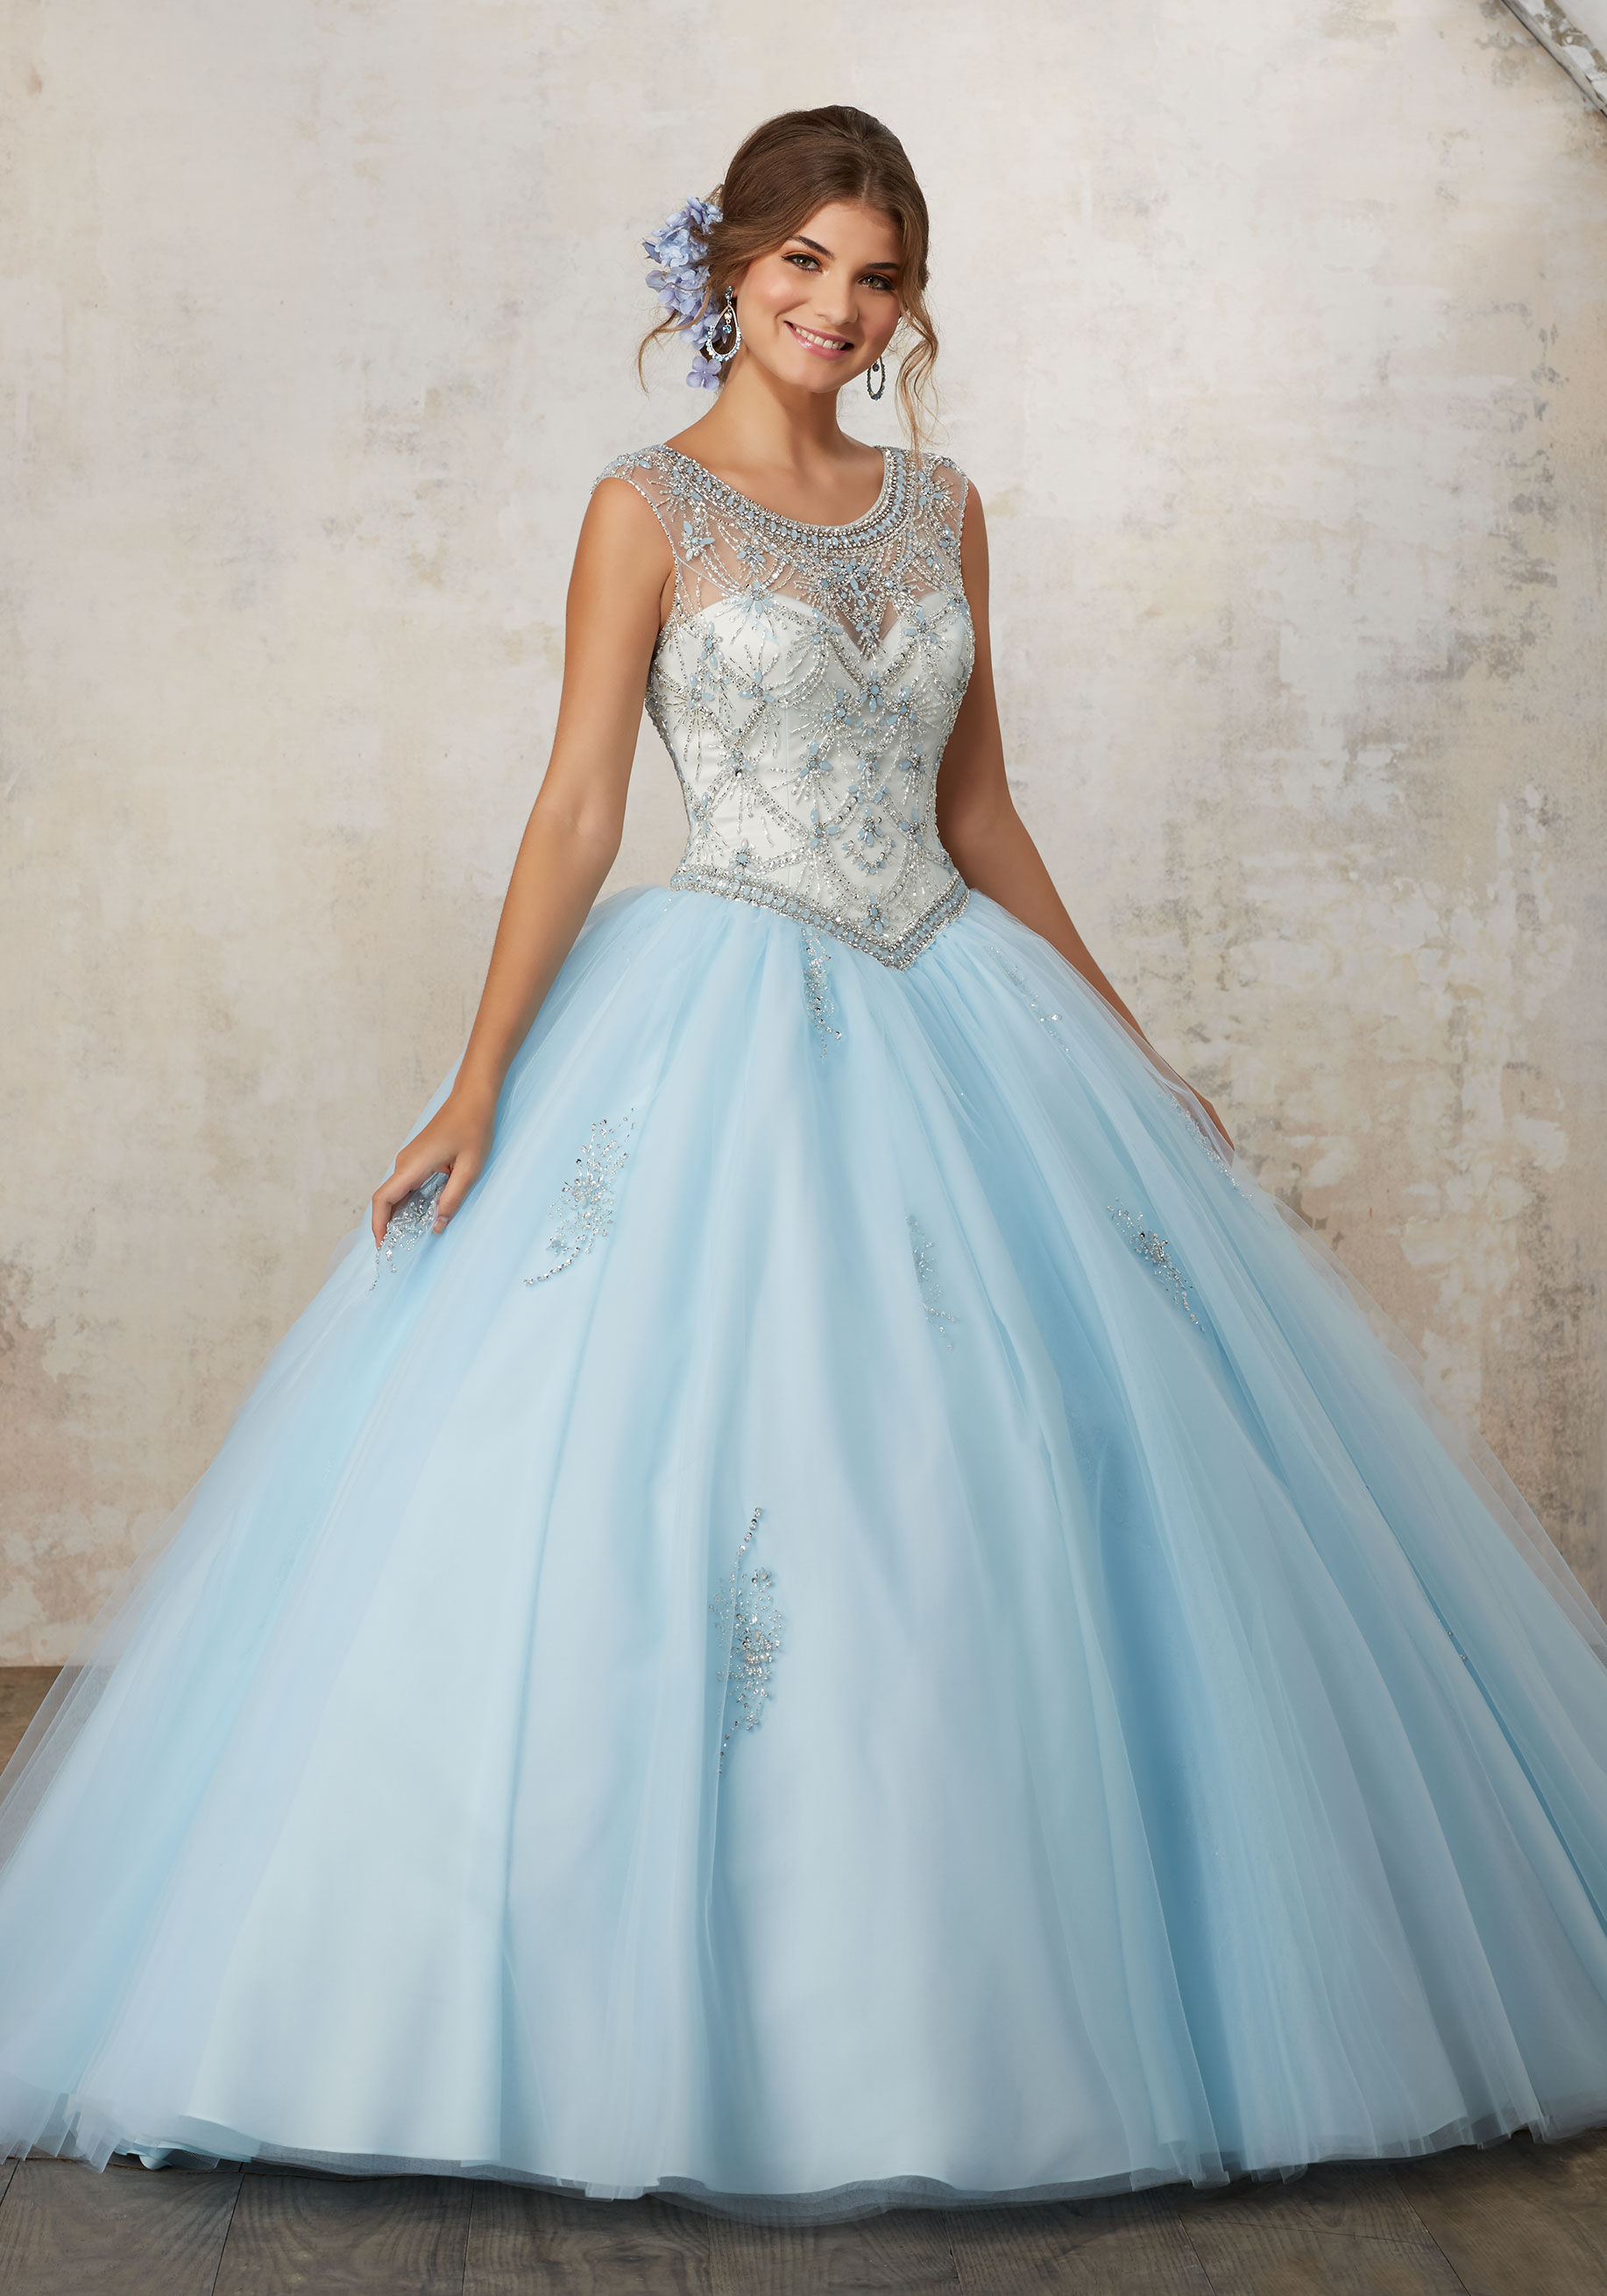 A picture of a woman in a blue ball gown posing for a picture of quinceanera dresses